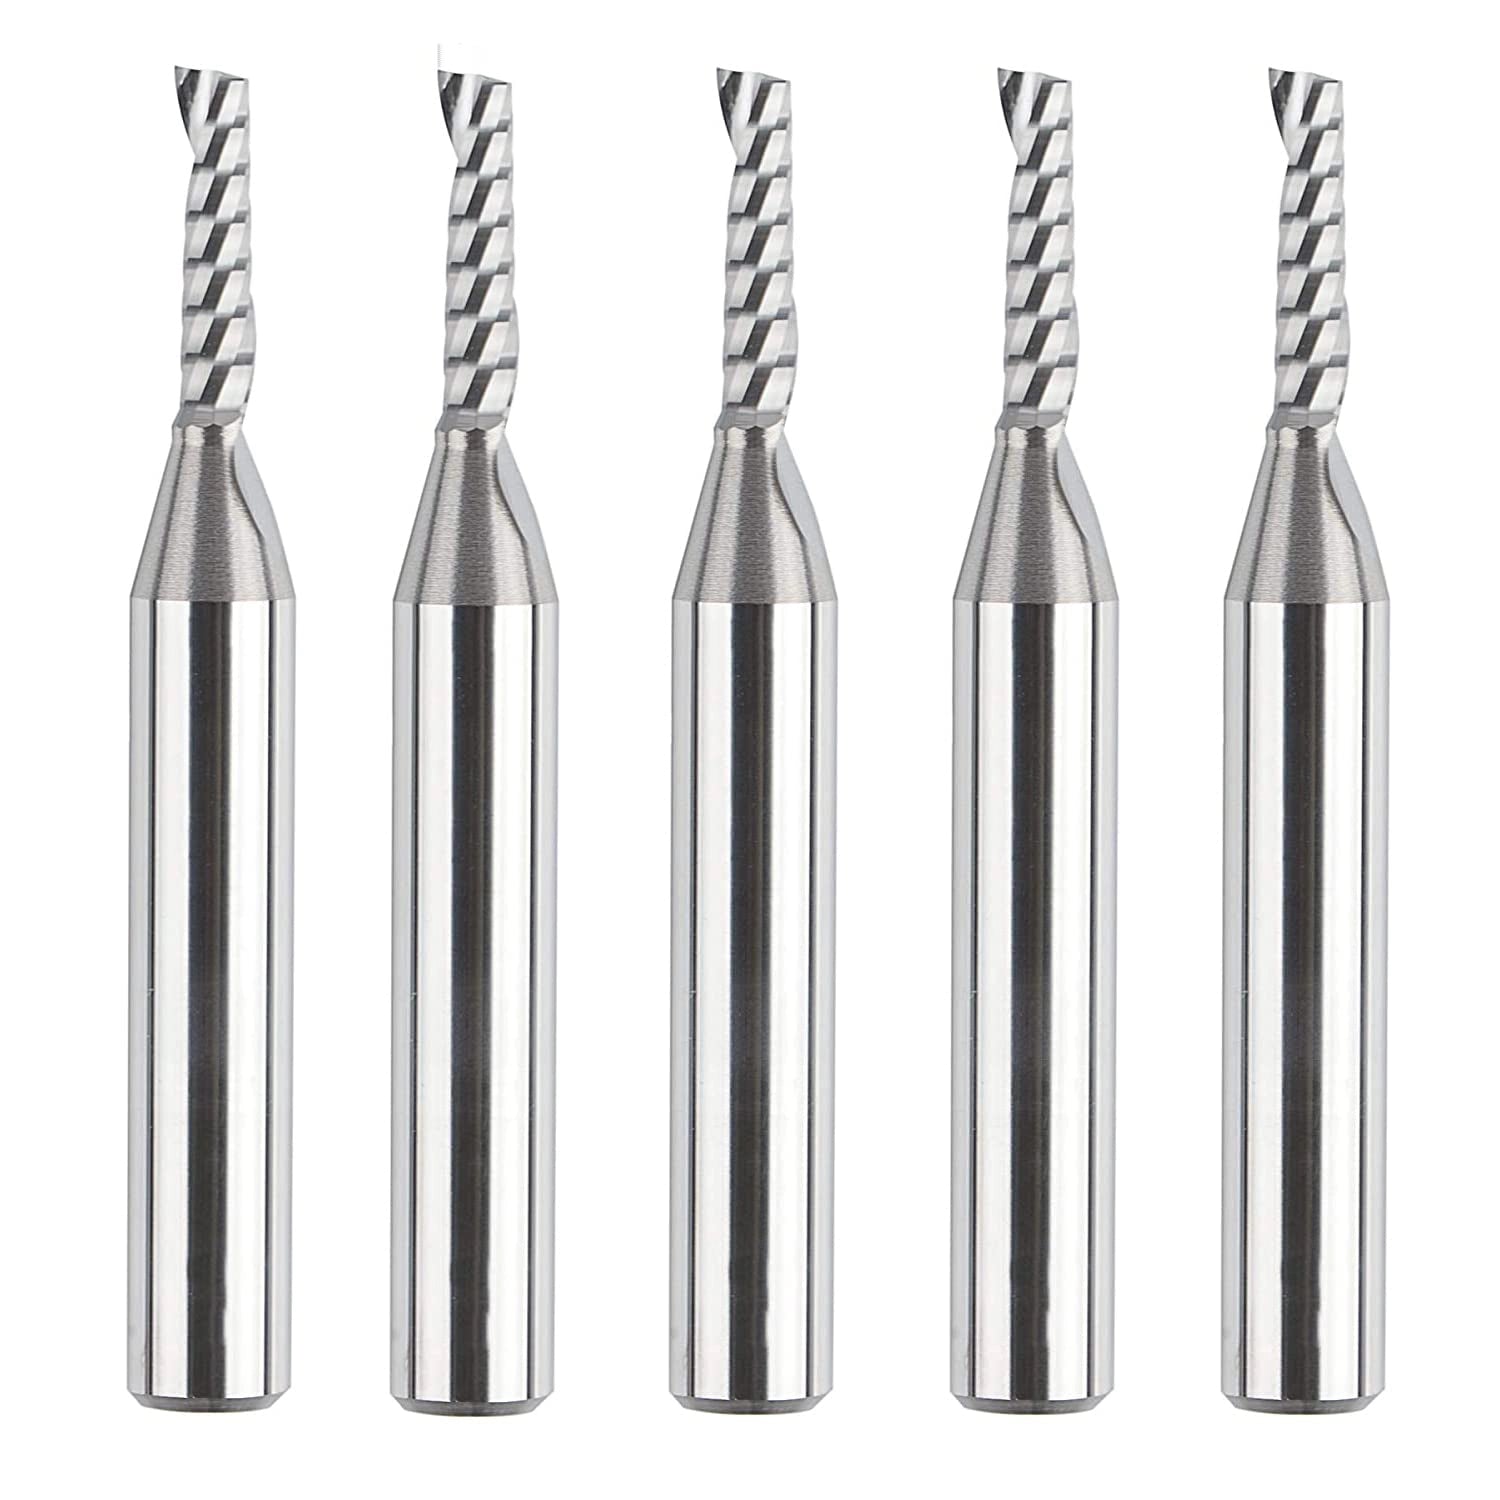 5 mm 4 flutes solid carbide end mill, shank Ø 6 mm - RCVHMF05-4, Router  fish tails, CUTTING TOOLS